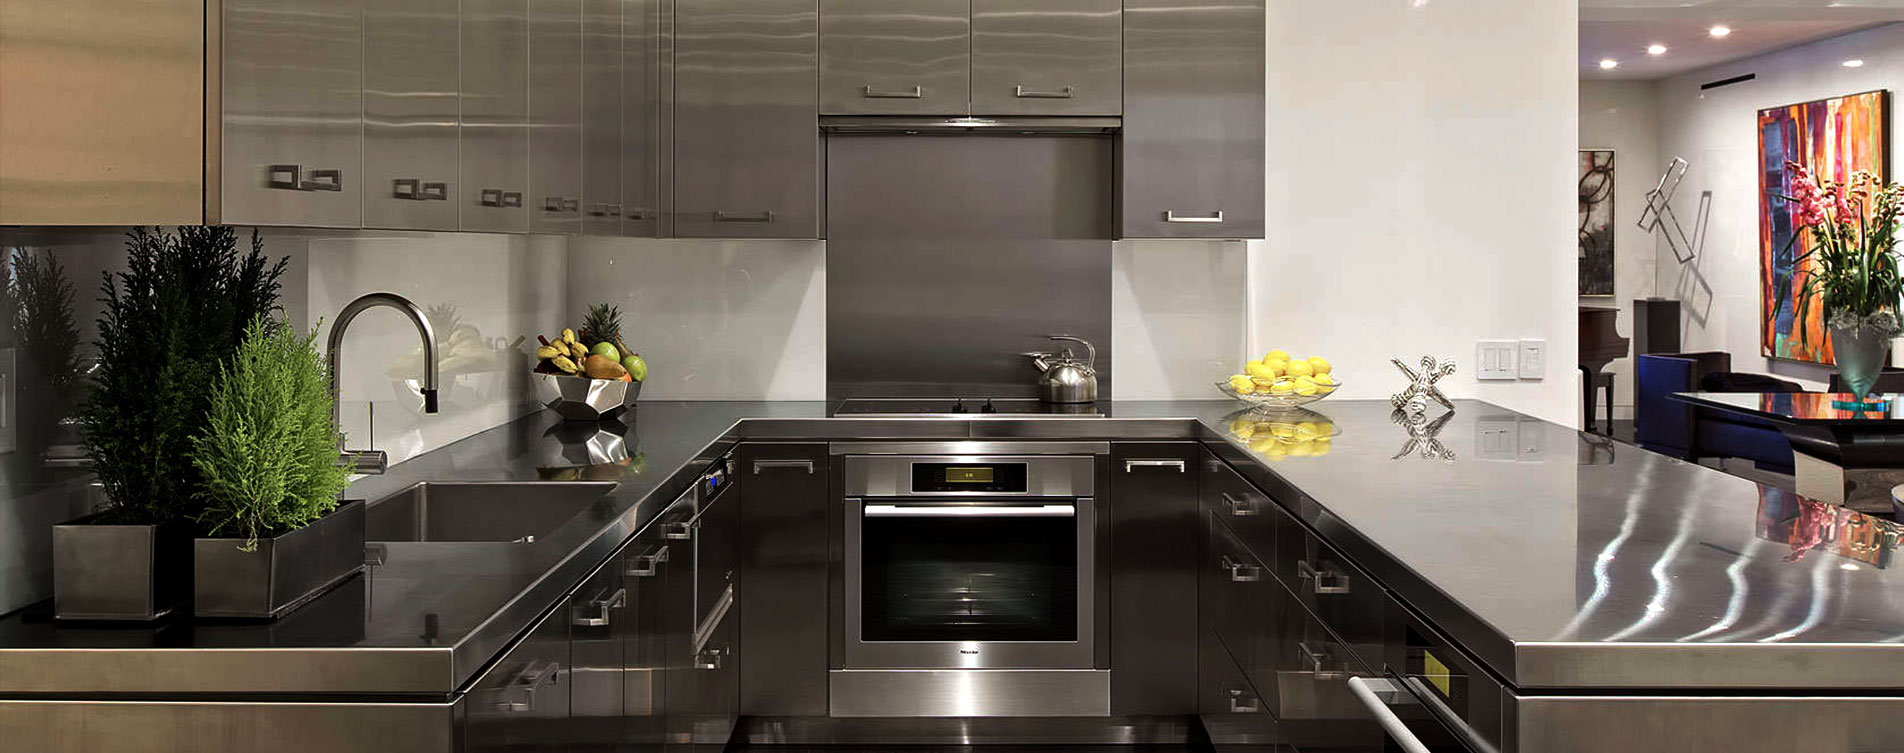 clean and shiny stainless steel residential kitchen